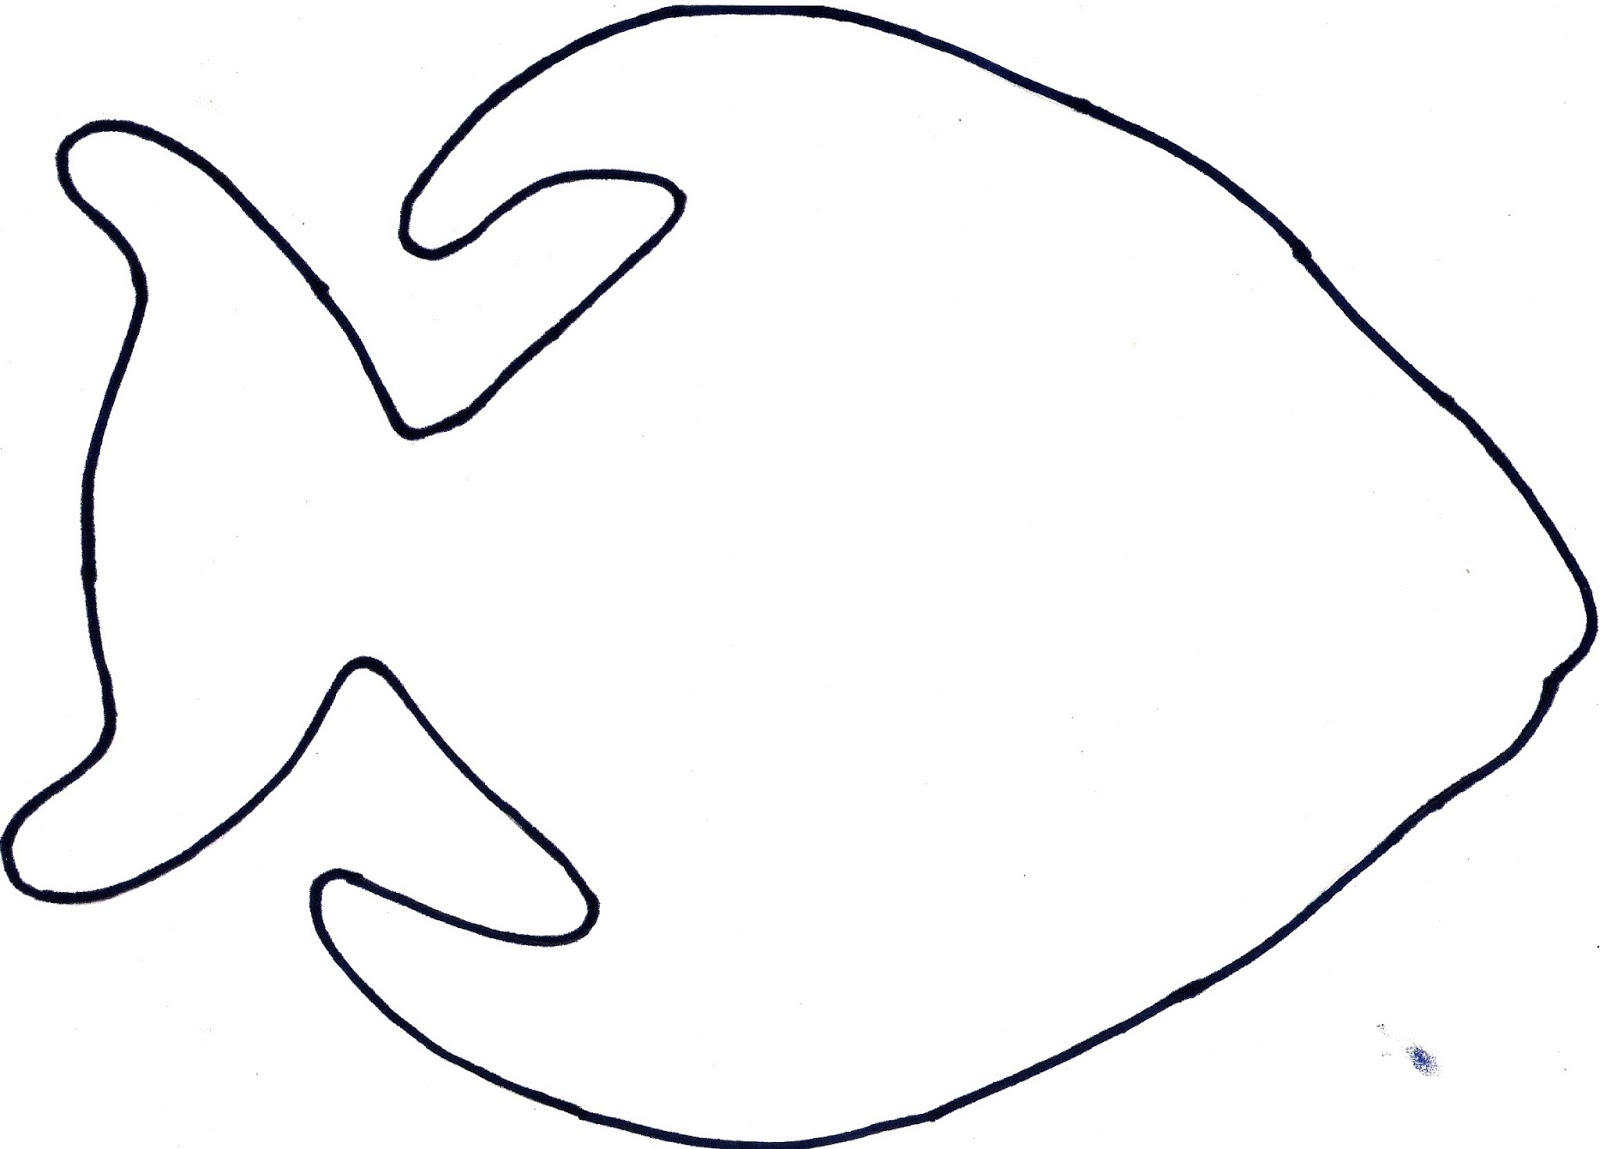 Clipart Fish Outline   Clipart Panda   Free Clipart Images